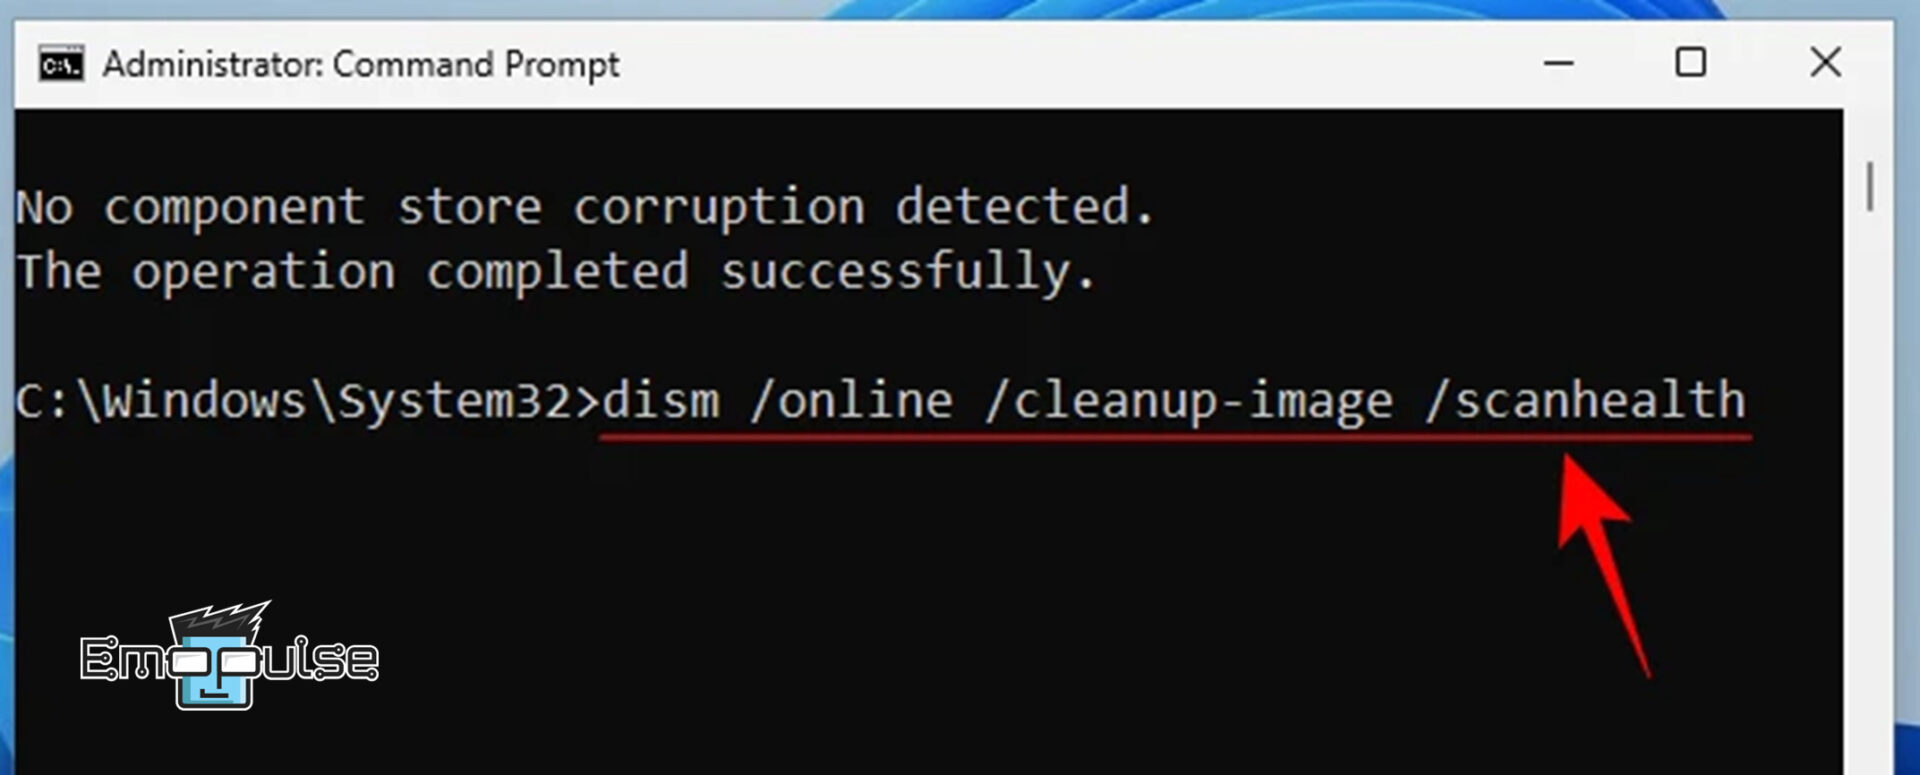 Run DISM for resolving Kernel Security Check Failure error